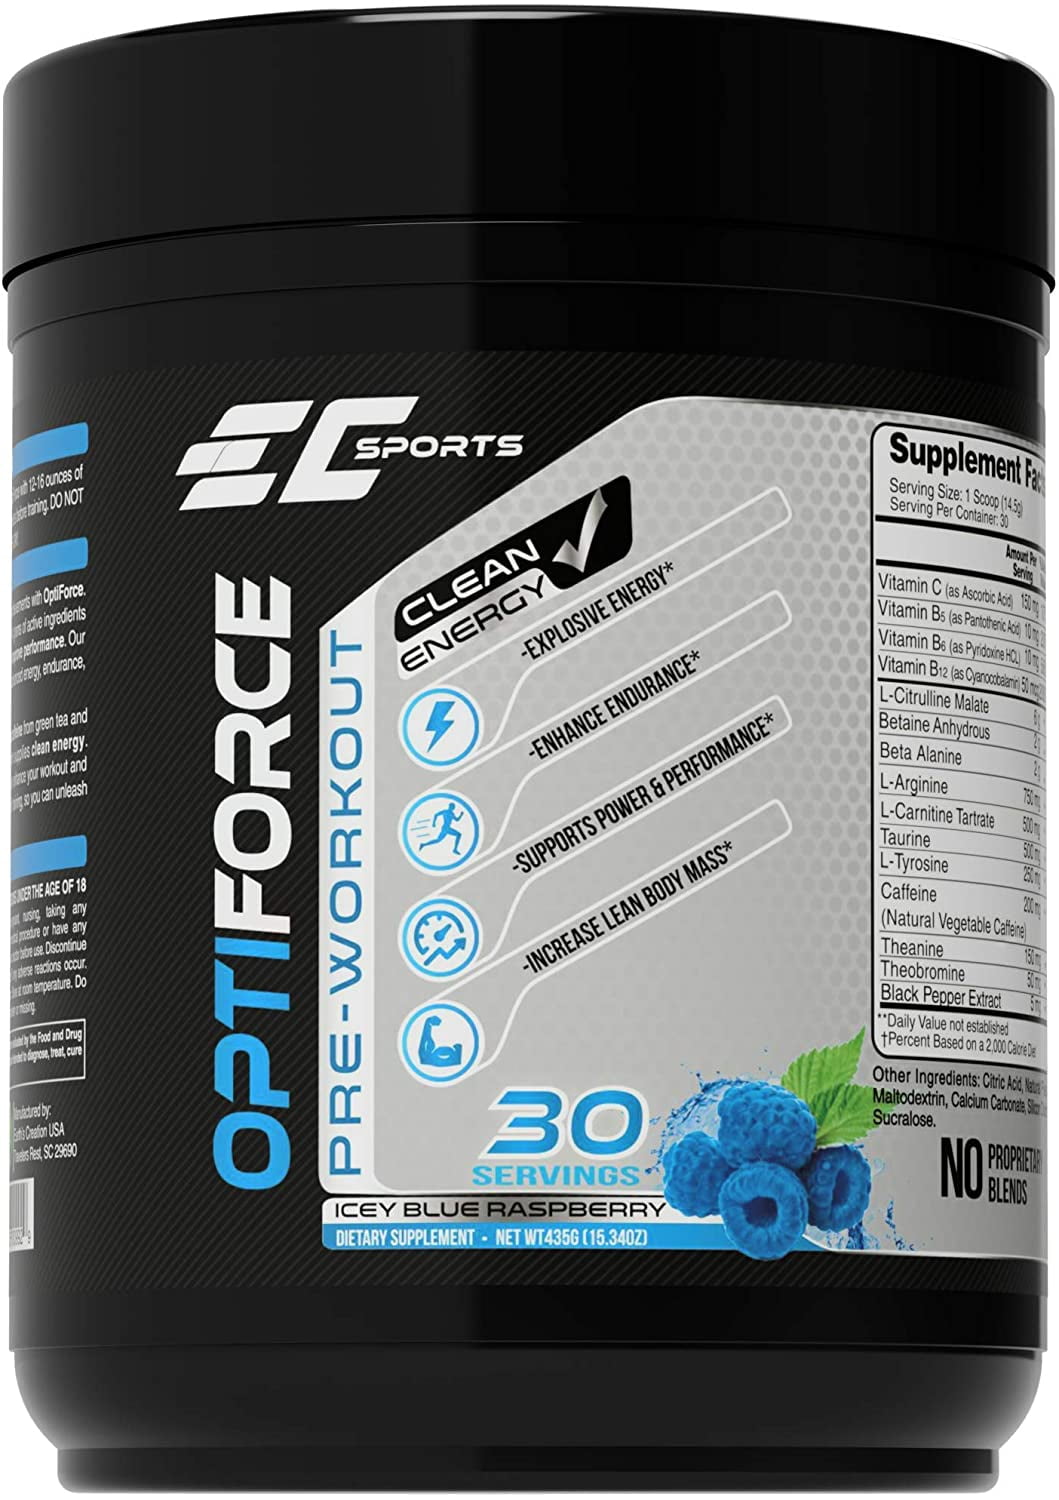 OptiForce Pre Workout - Clean Preworkout, Natural Energy Boost